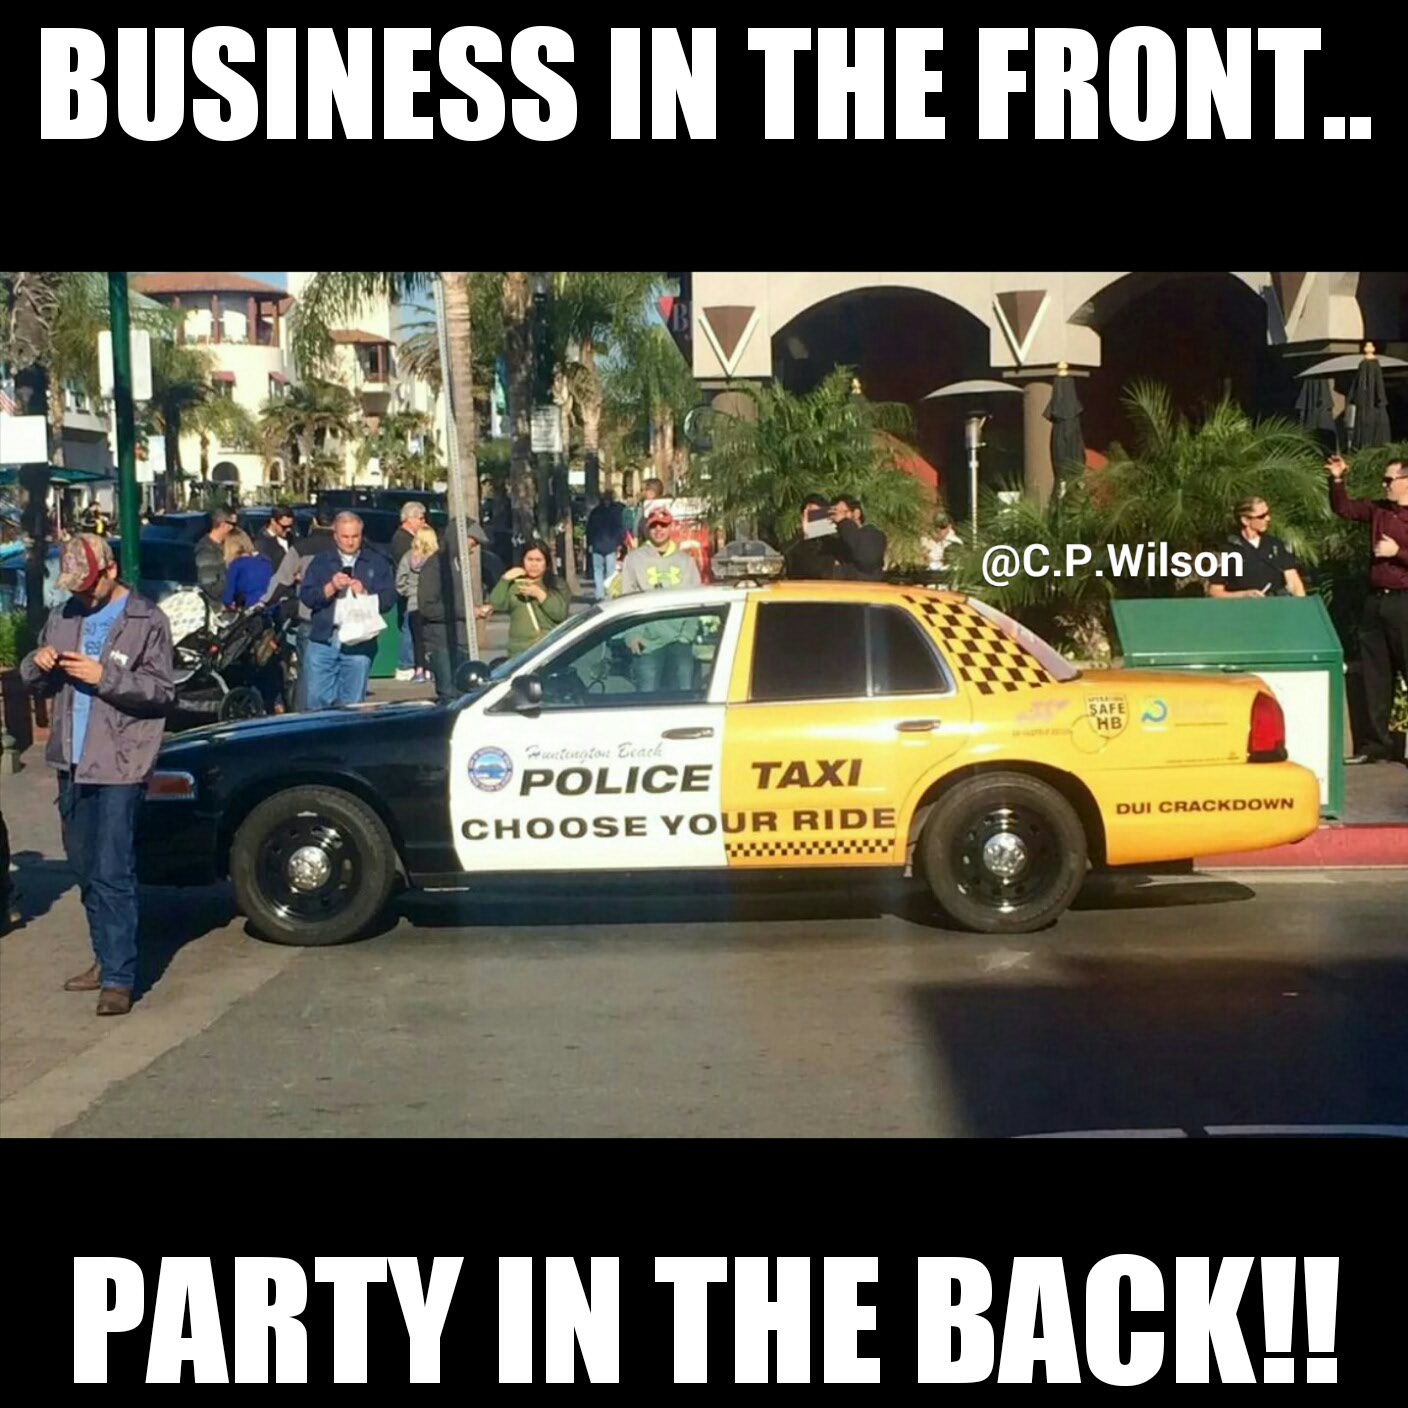 Business in the front, party in the back!